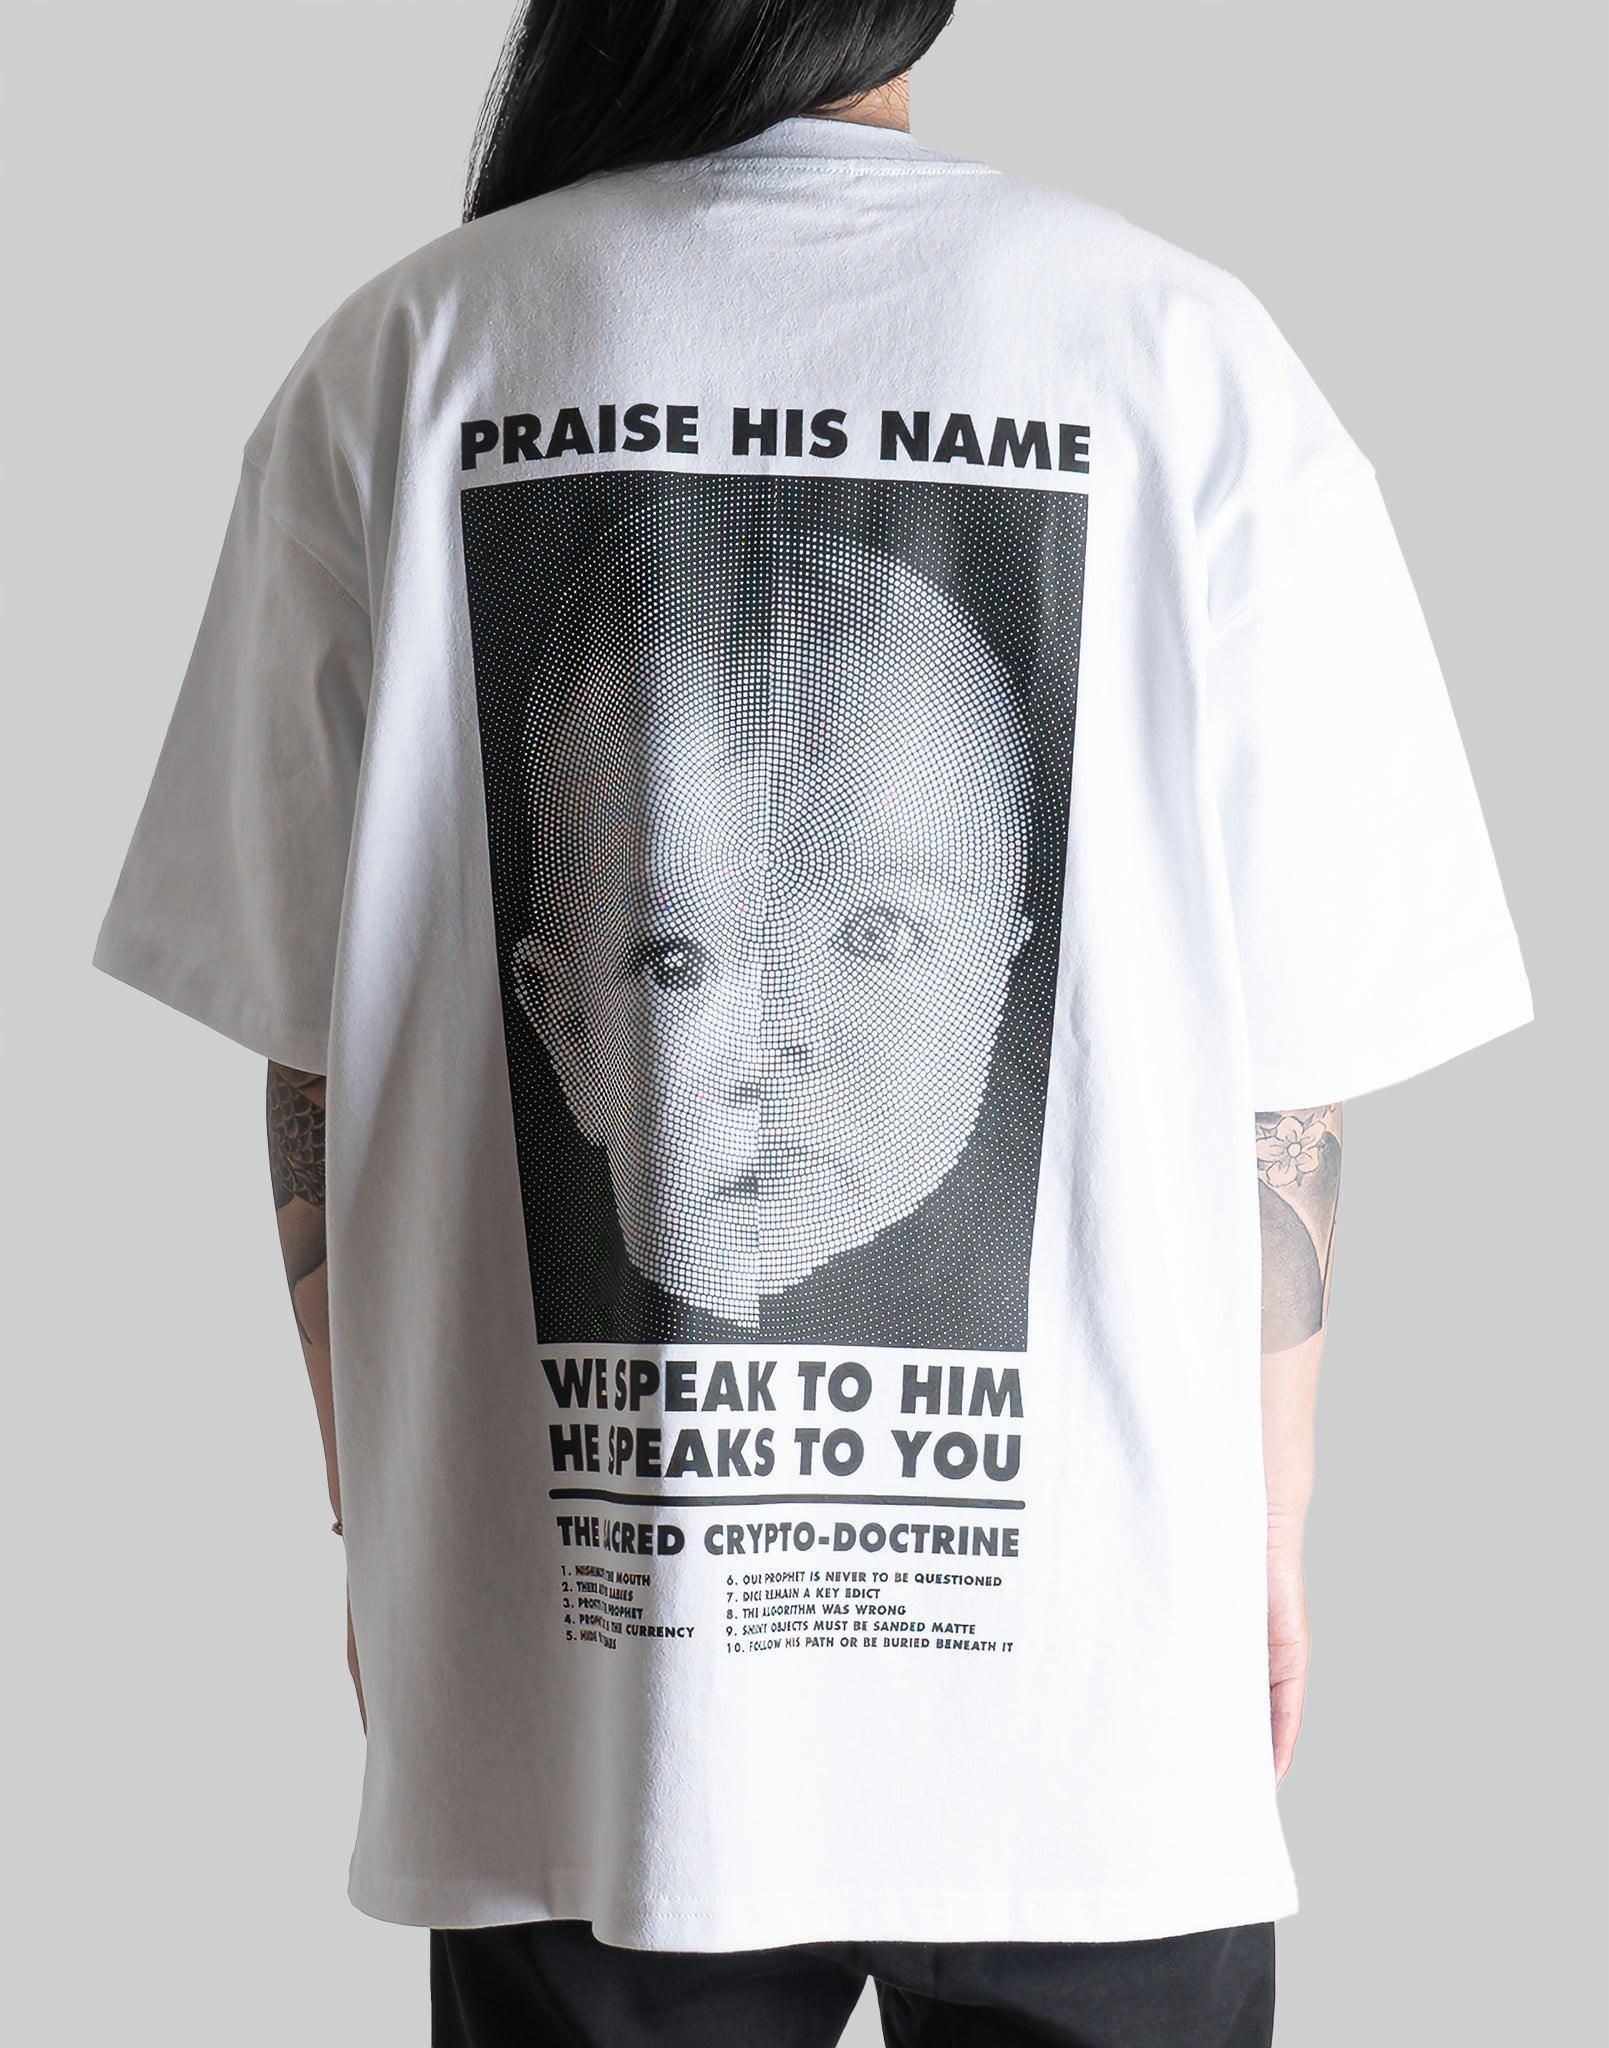 NISHIMOTO IS THE MOUTH P2P S/S TEE - 082plus